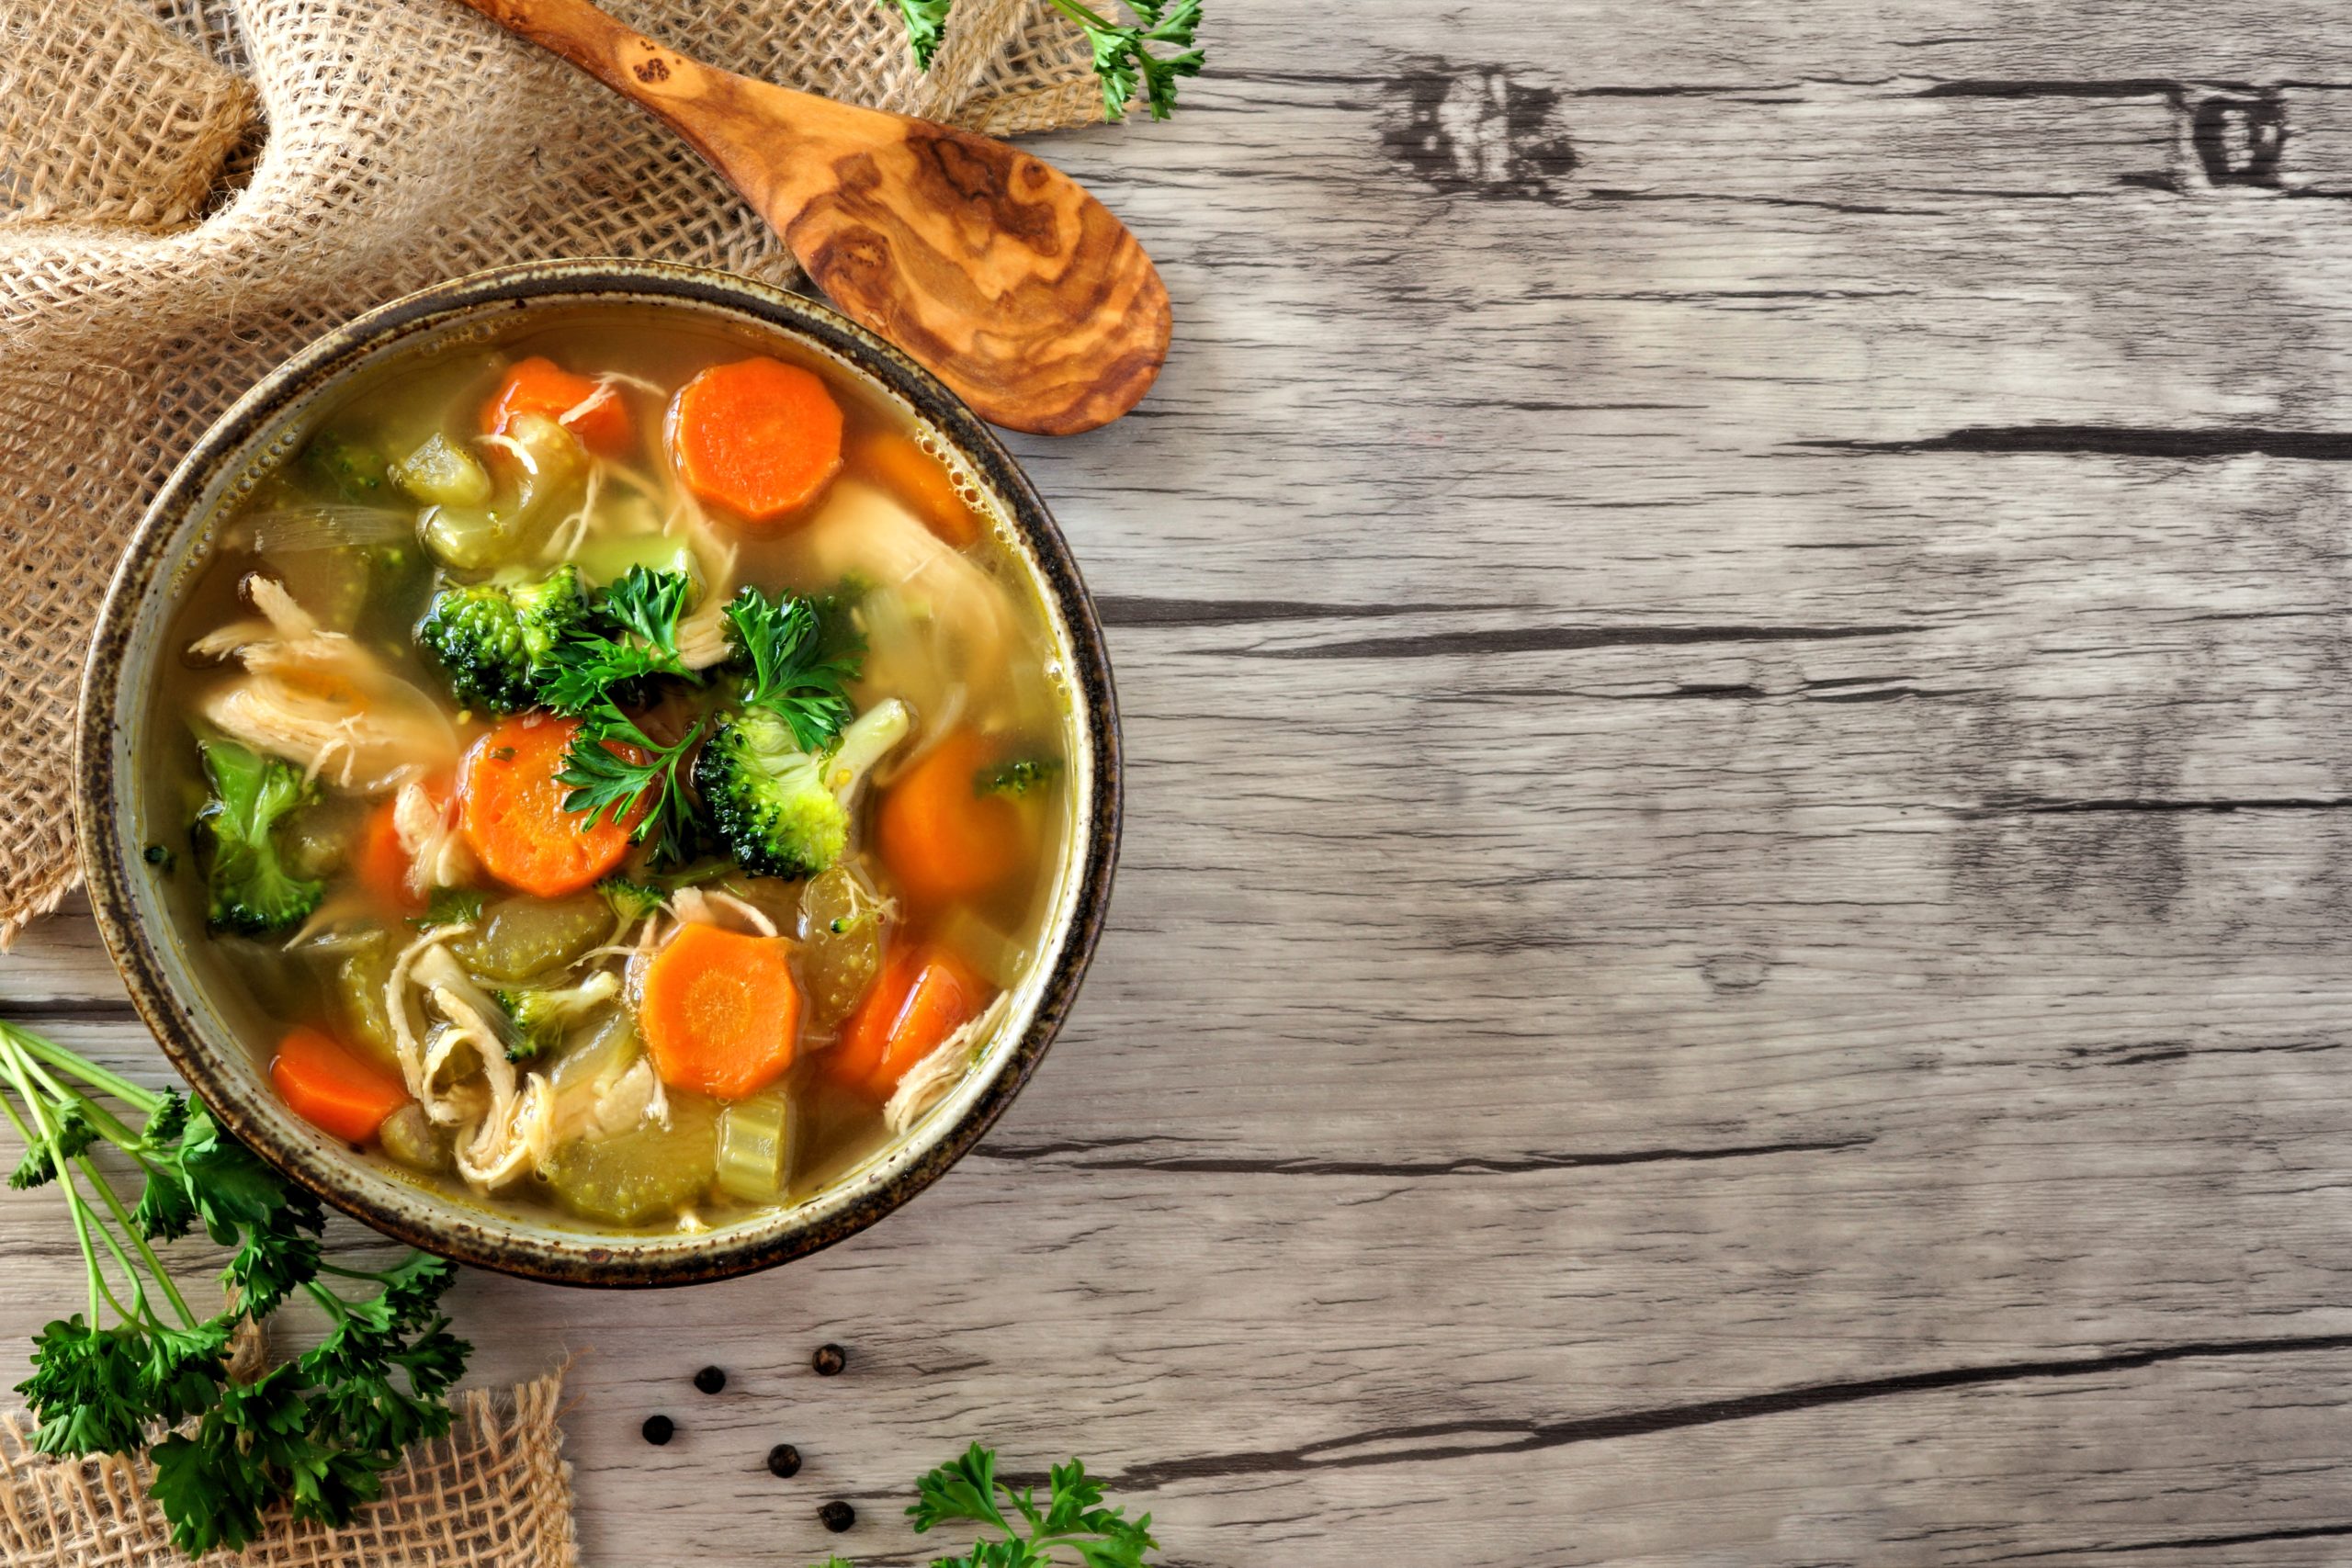 https://thesweetpotato.ca/wp-content/uploads/2020/02/Chicken-Soup-1-scaled.jpg